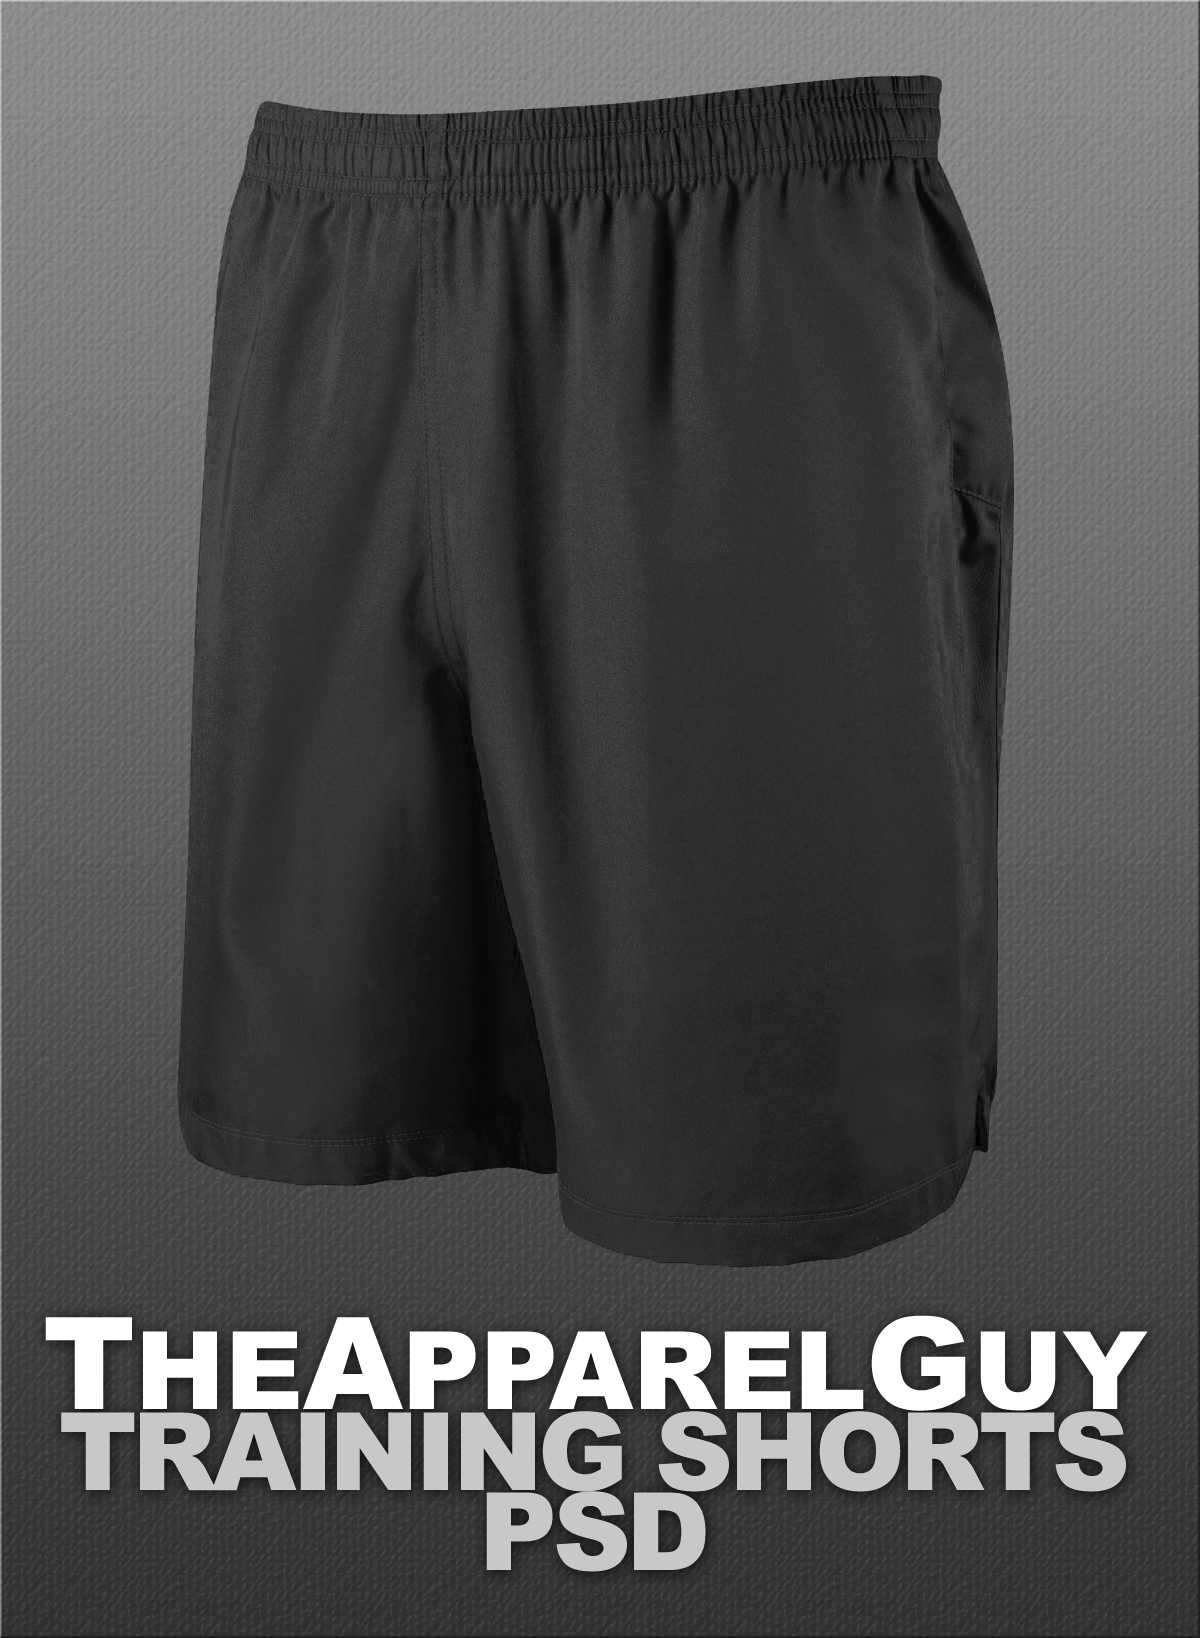 Download Free Training Shorts Psd By Theapparelguy On Deviantart PSD Mockups.